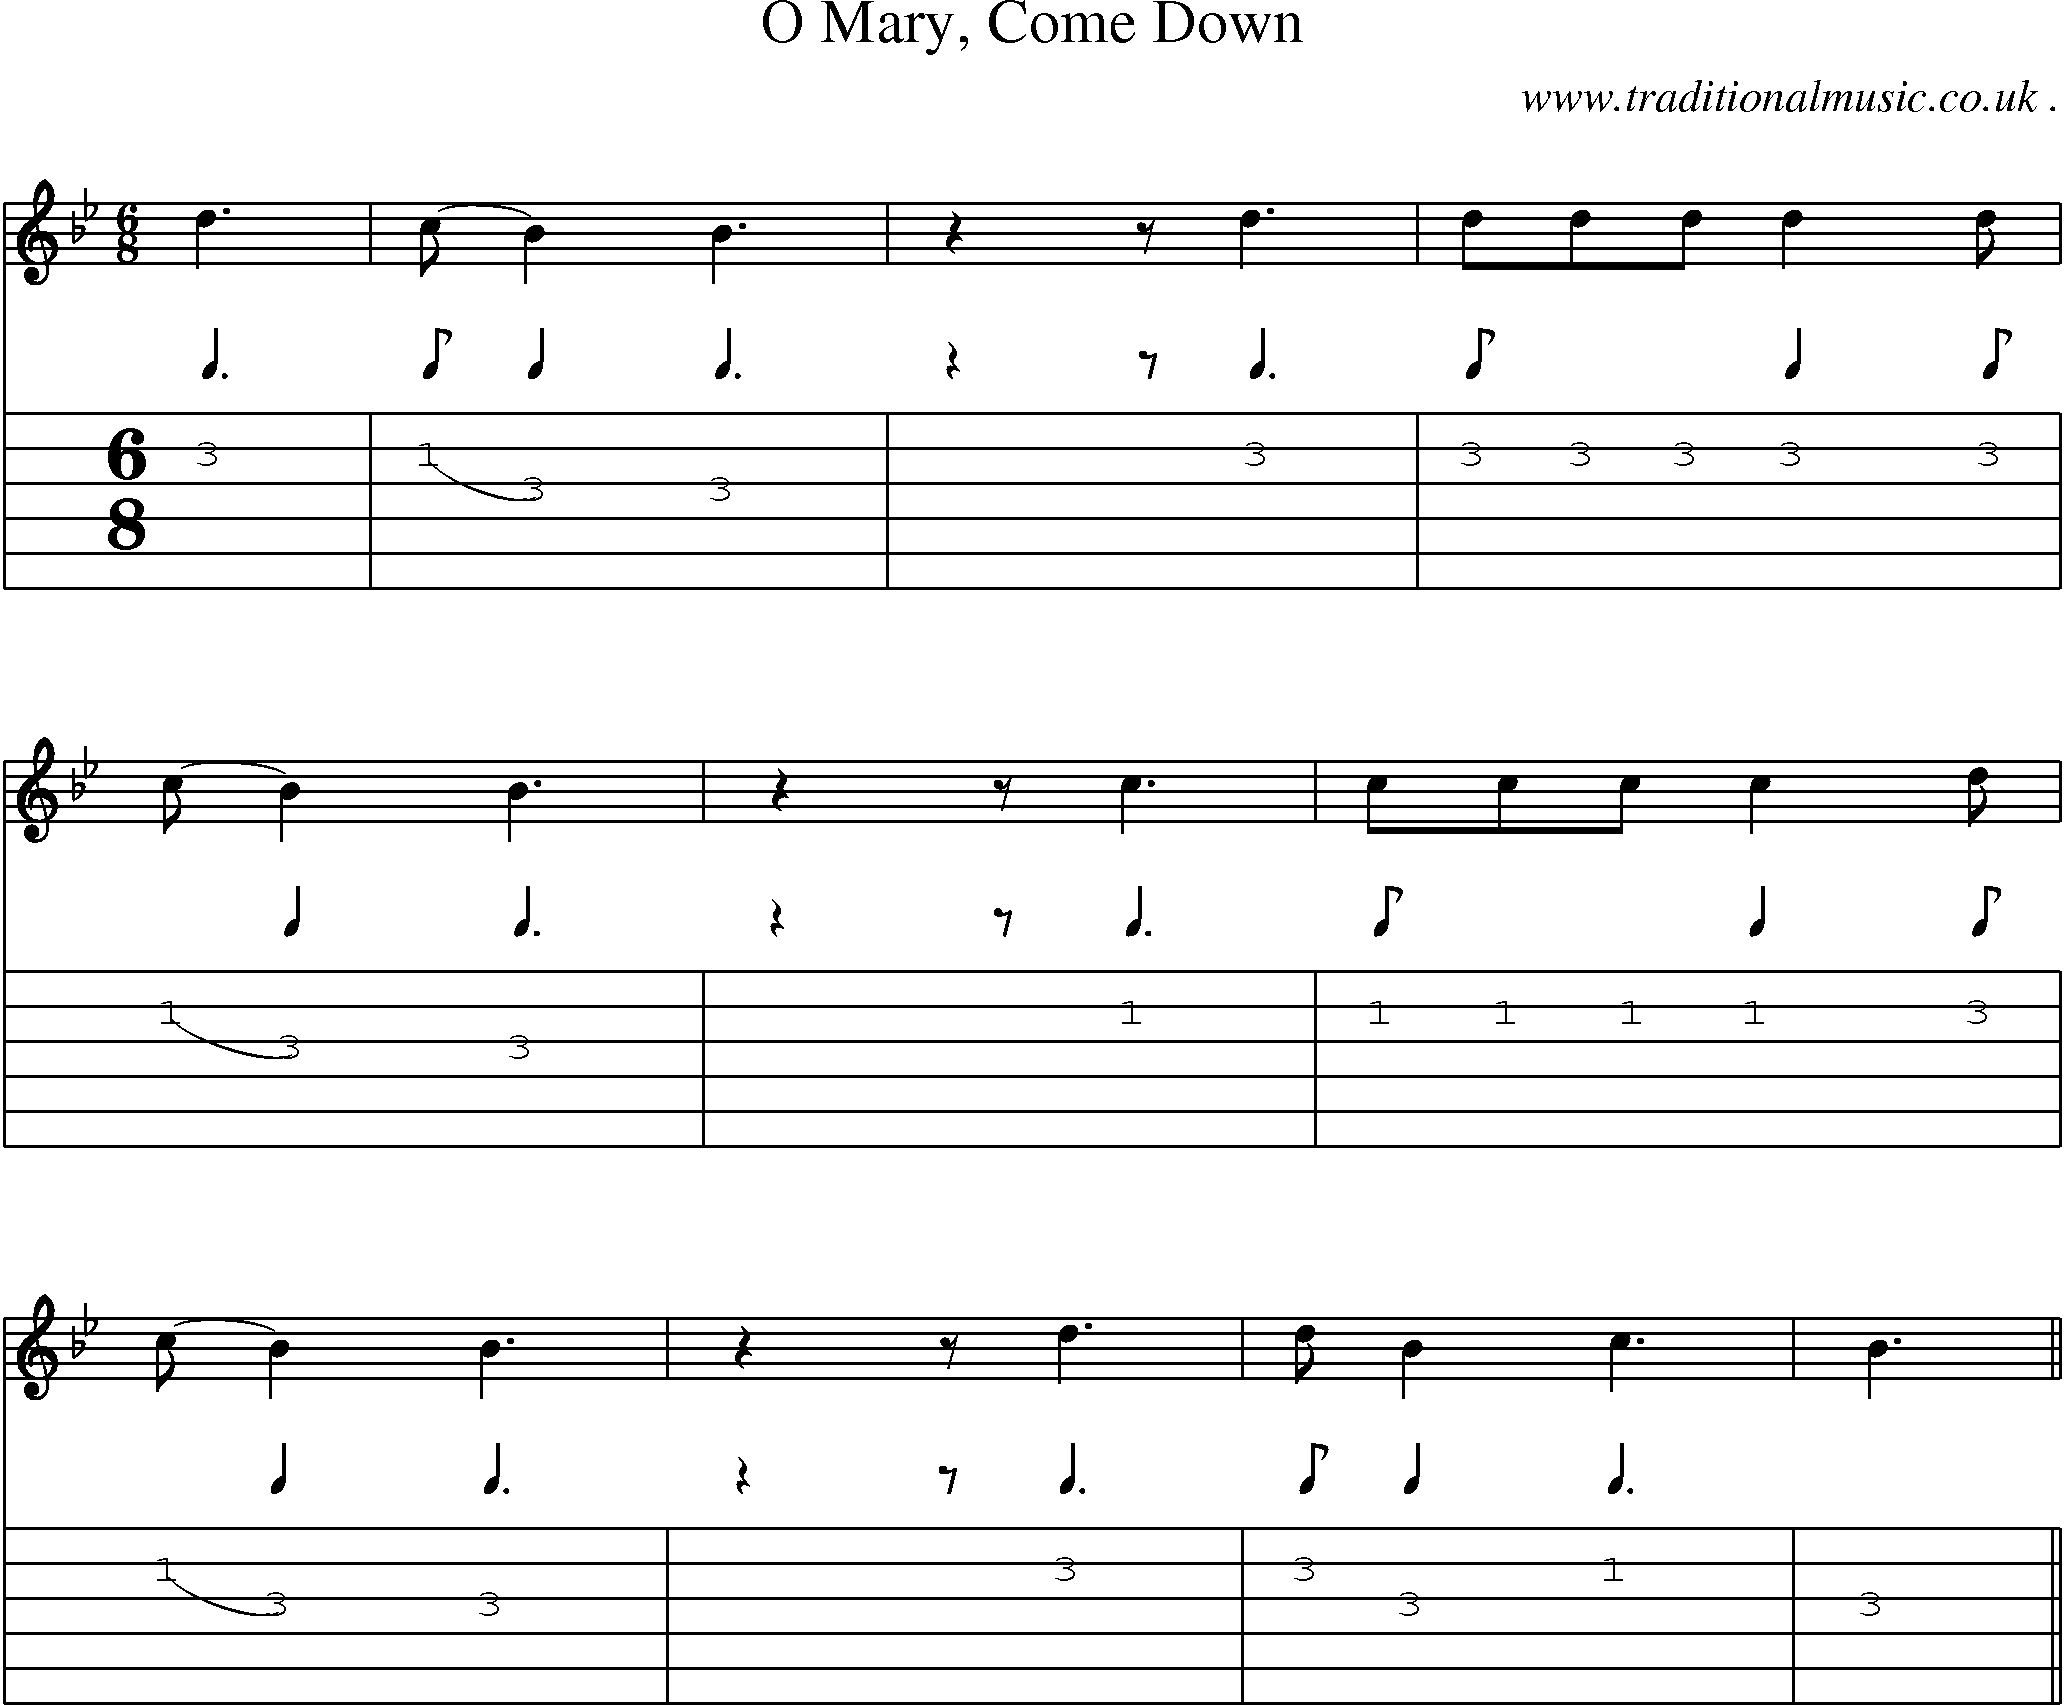 Sheet-Music and Guitar Tabs for O Mary Come Down